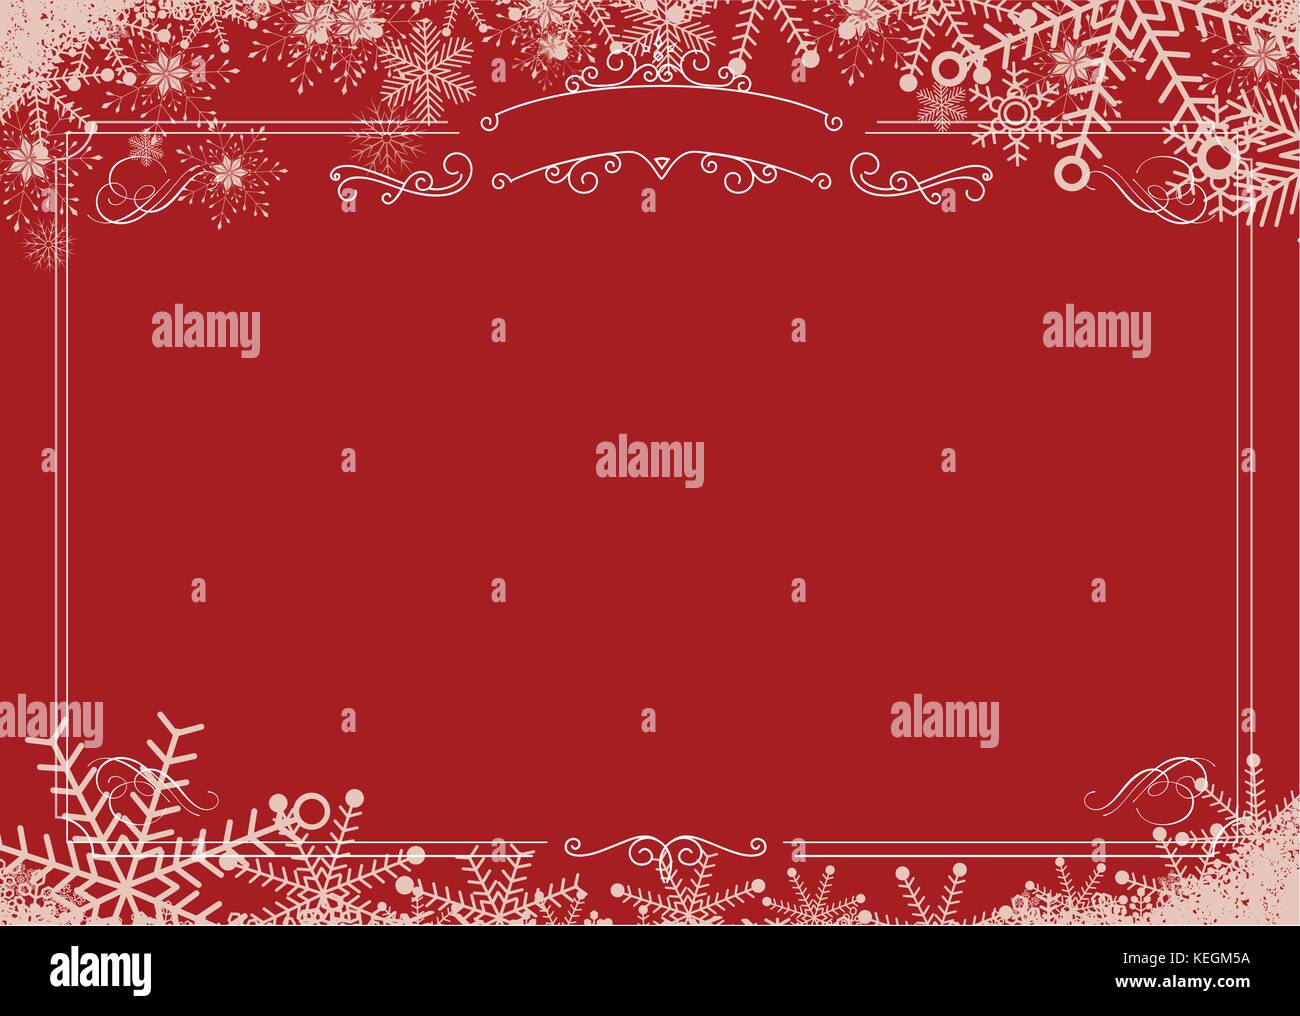 A3 size Cafe menu - Christmas winter snowflake, retro border and red textured background Stock Vector